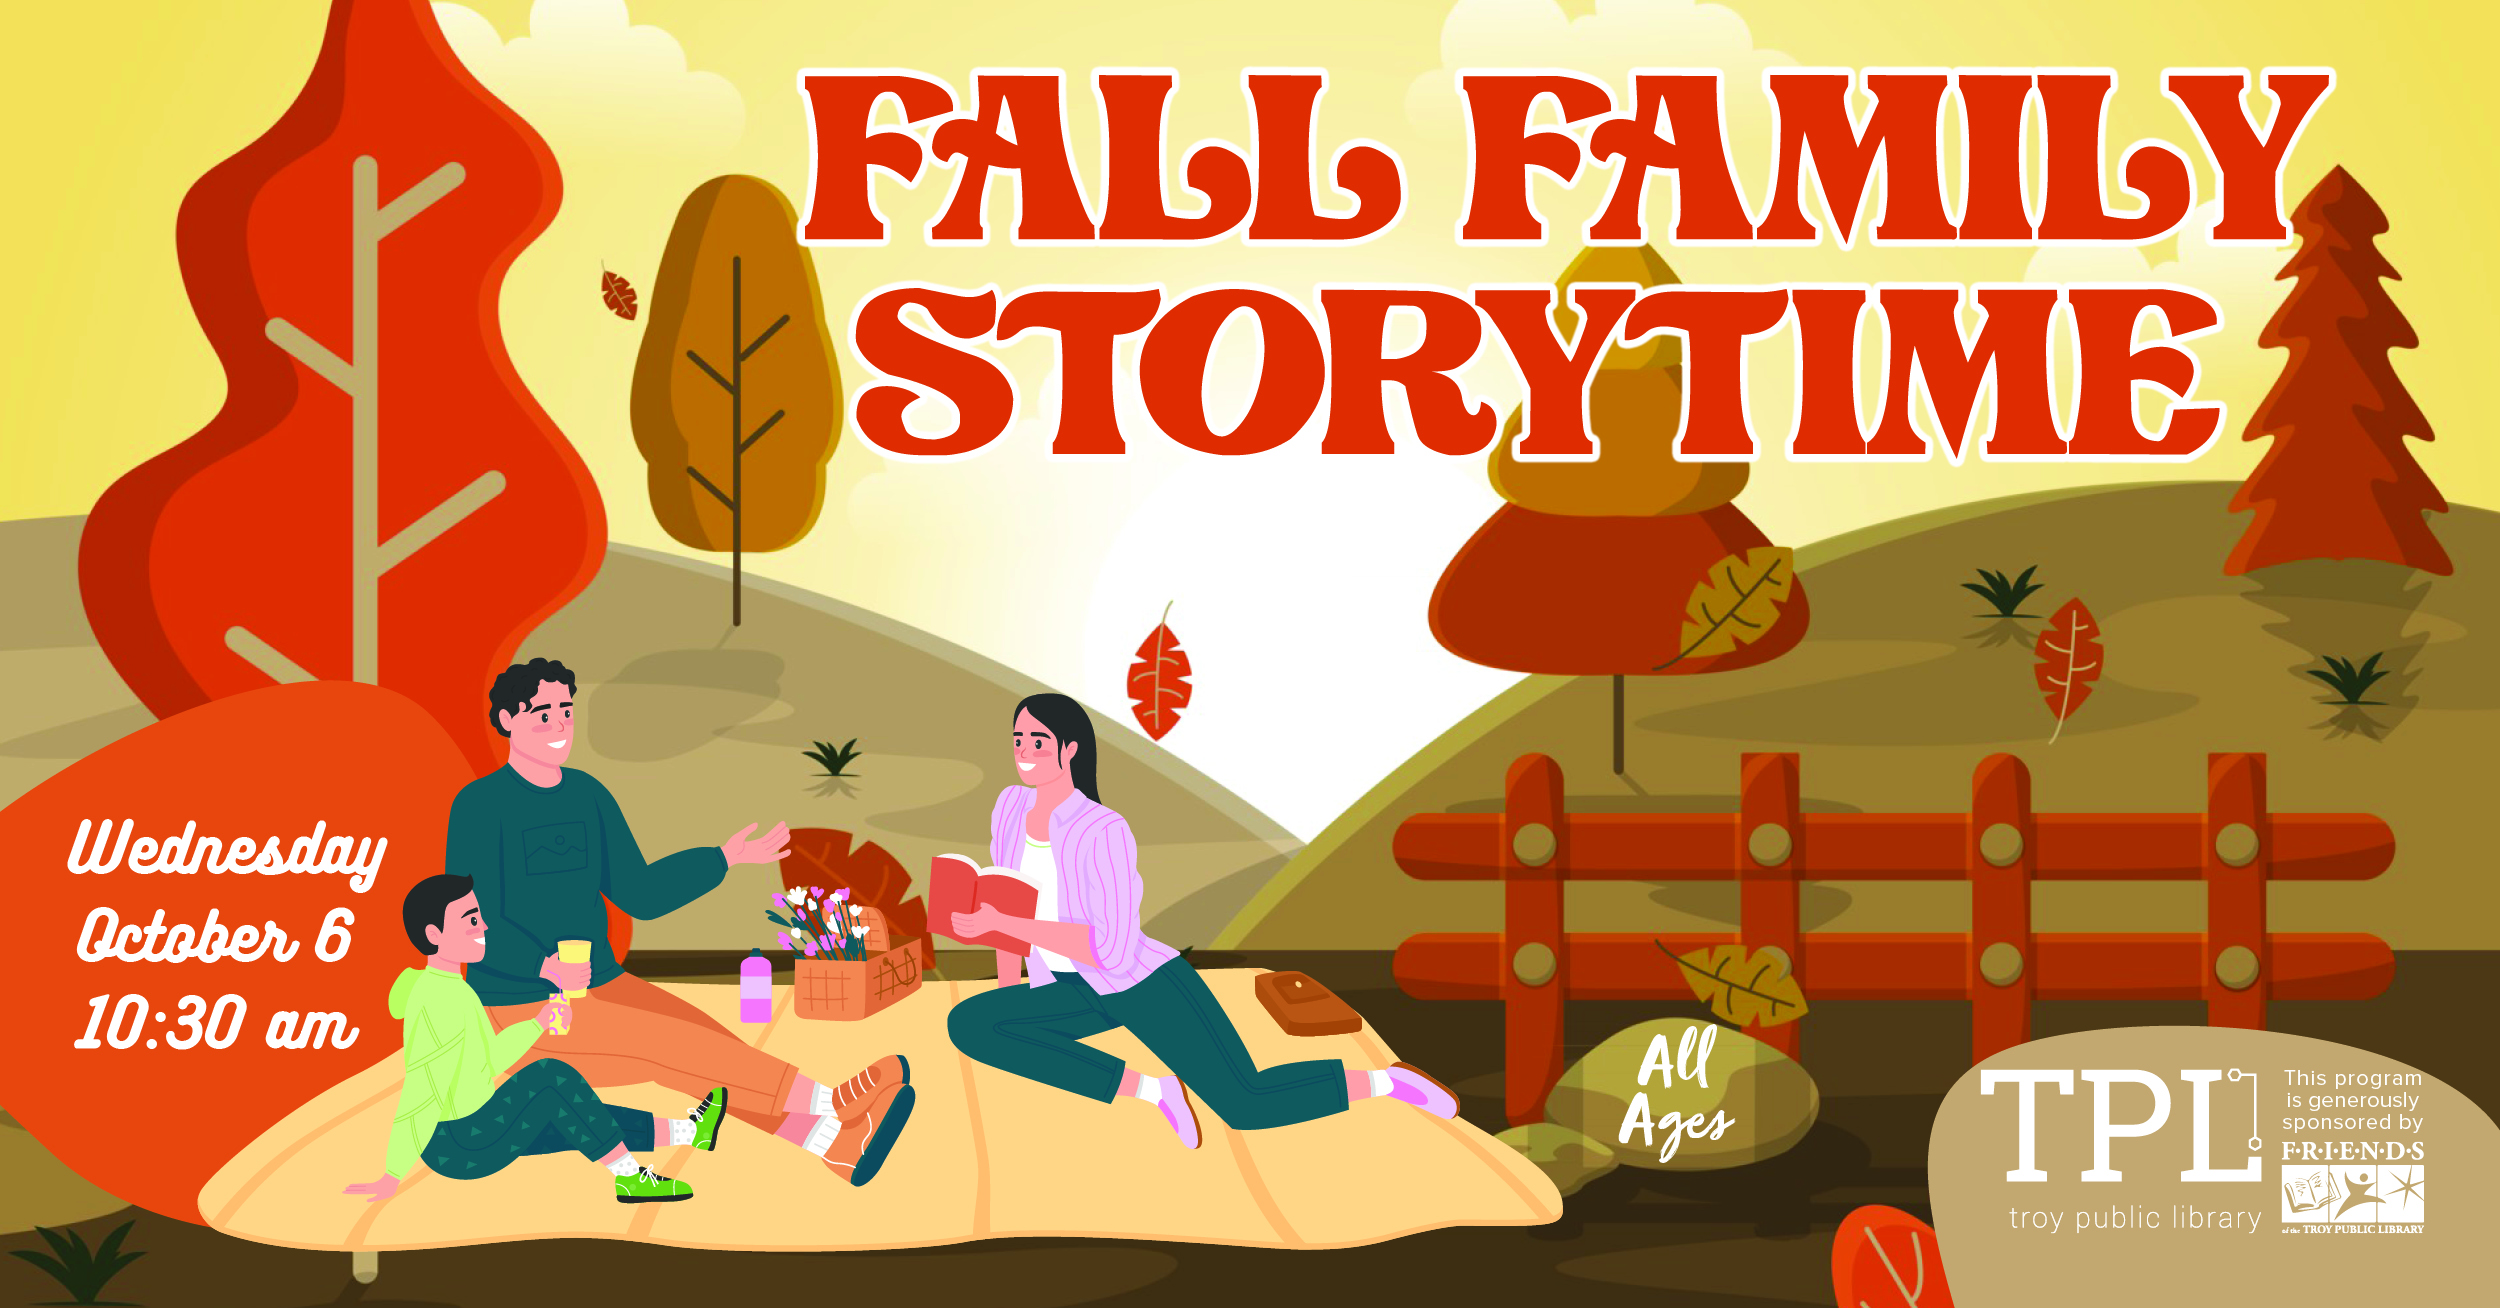 Fall Family Storytime Wednesday October 6 10:30am All ages. Sponsored by the Friends of the Troy Public Library